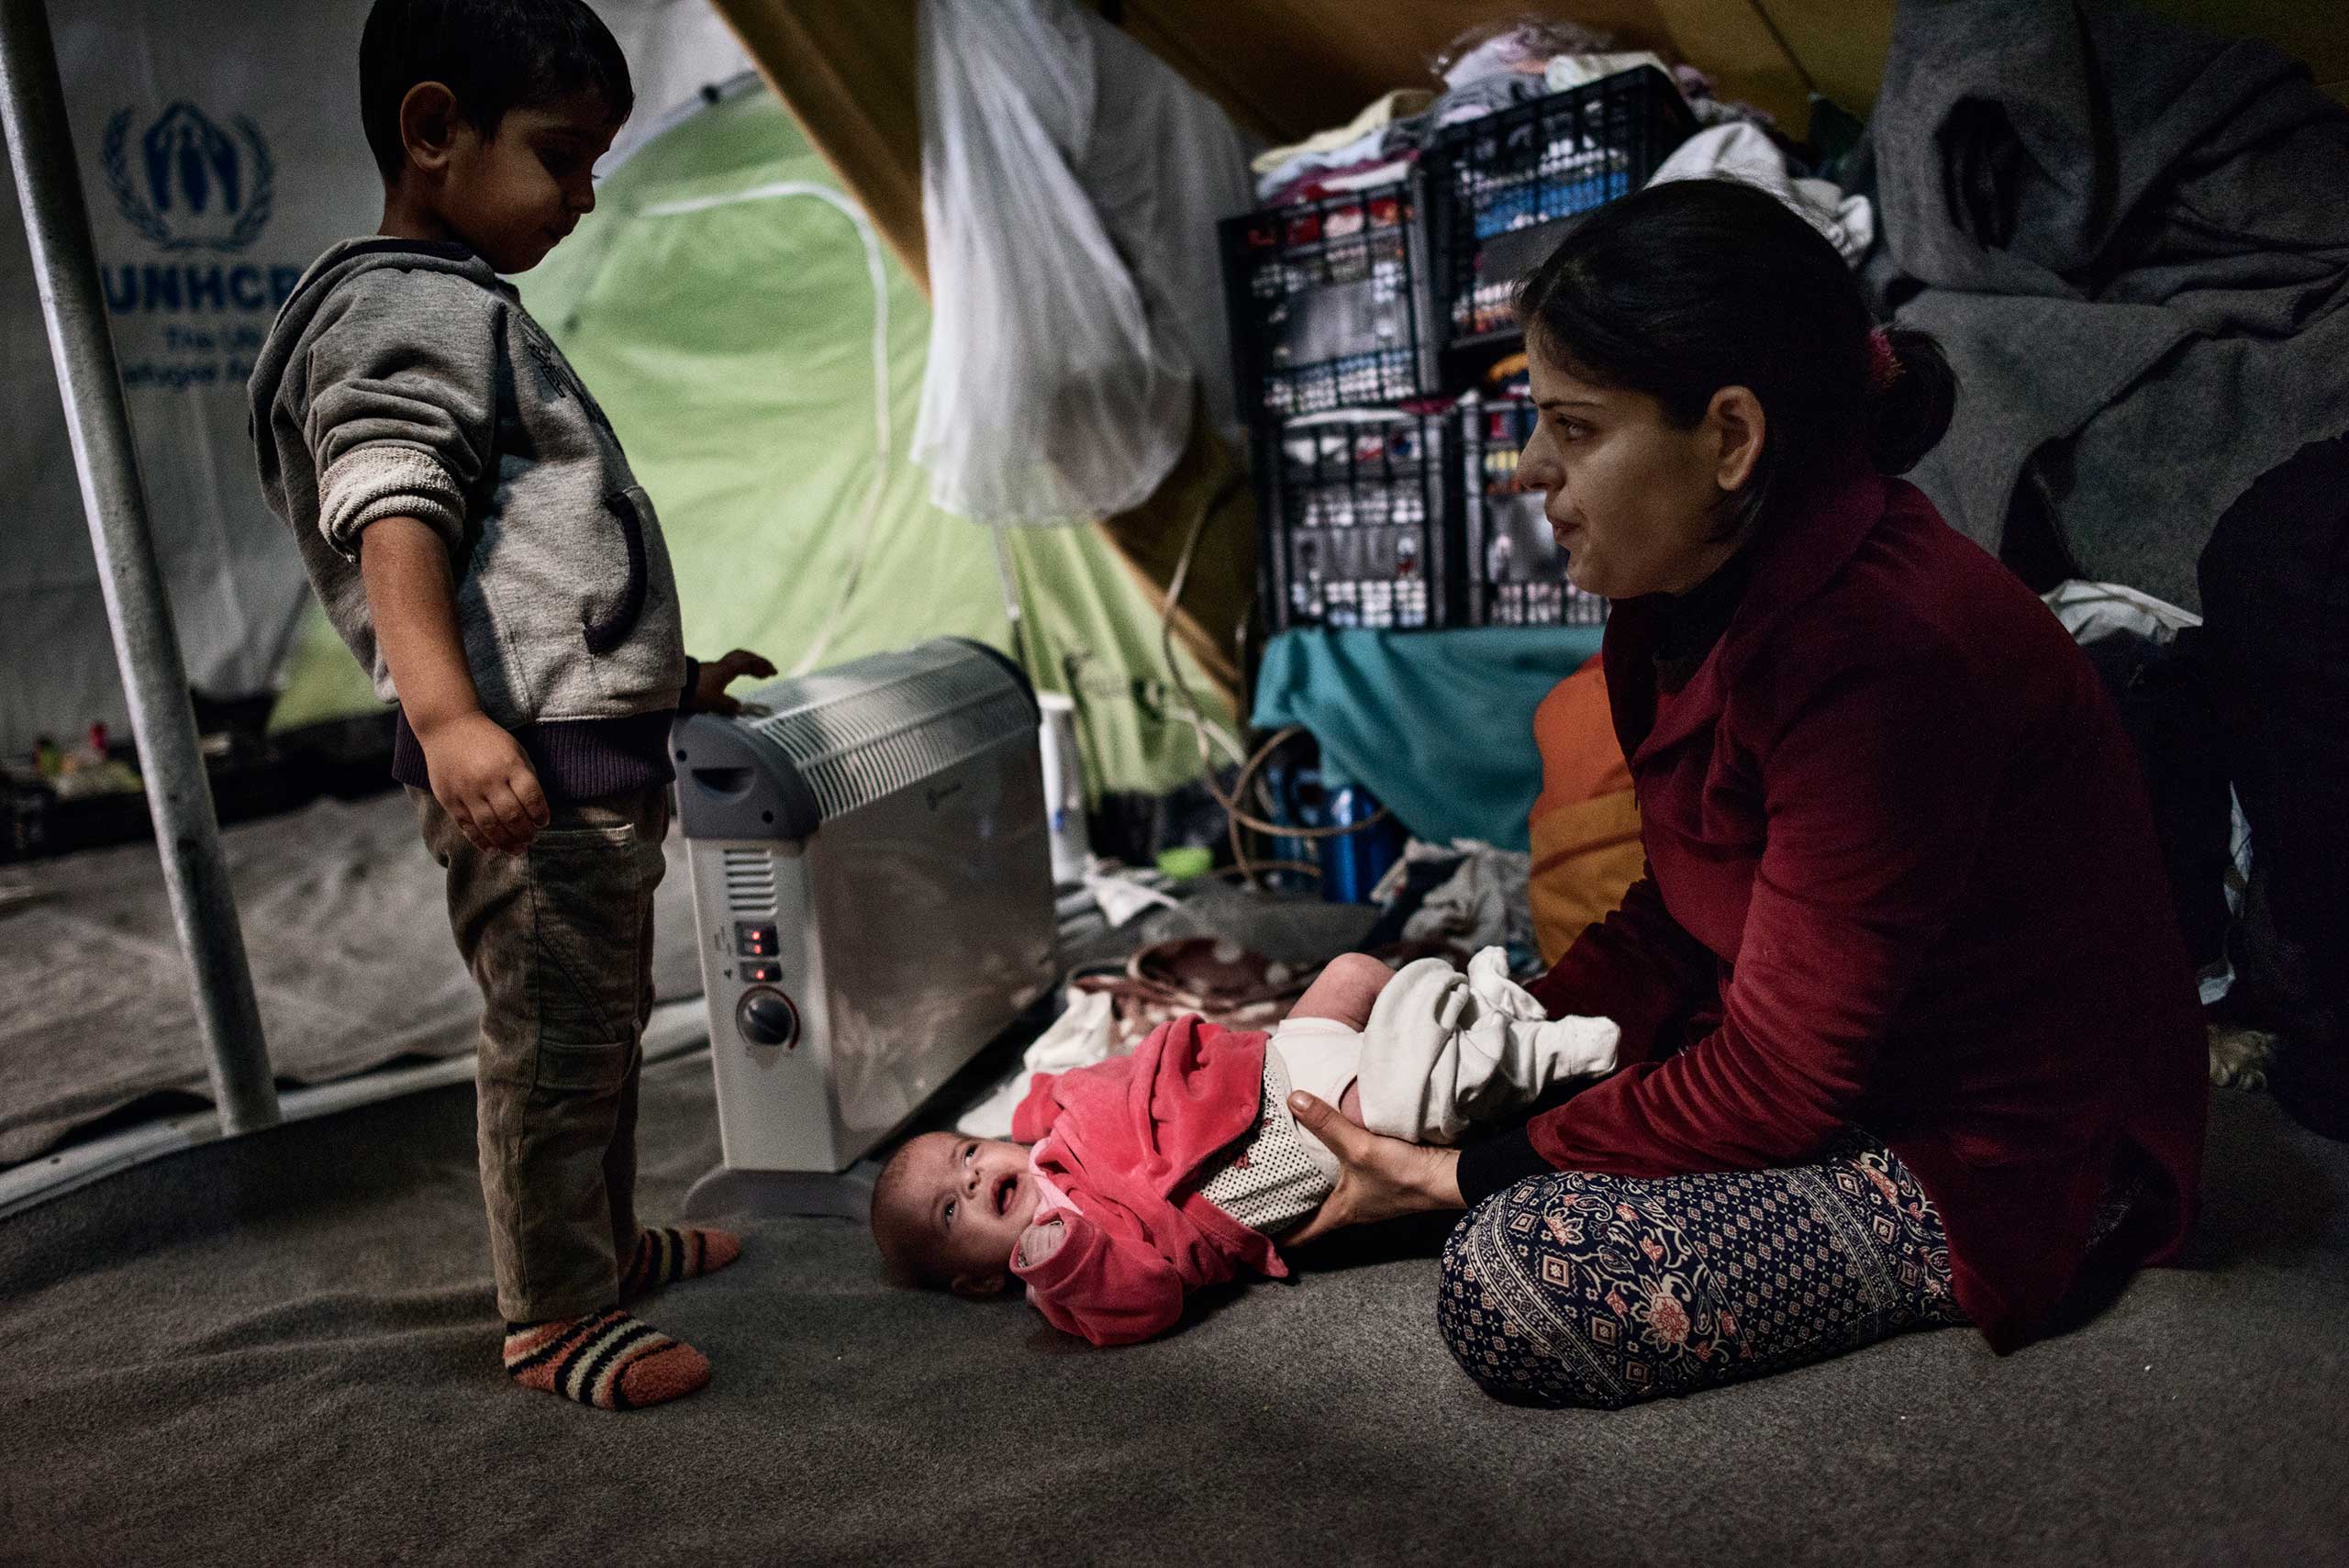 Dejla Alloush, 25, with her son and infant born on Oct. 6, 2016 at a camp in  Thessaloniki, Greece. She and her husband Mohammad, 40, are from Aleppo. Dejla is Mohammad's second wife. He married her because his first wife, Khelat, couldn't have children. Now Dejla worries she will be separated from her four children because Europeans do not accept polygamous marriages, Nov. 11, 2016.